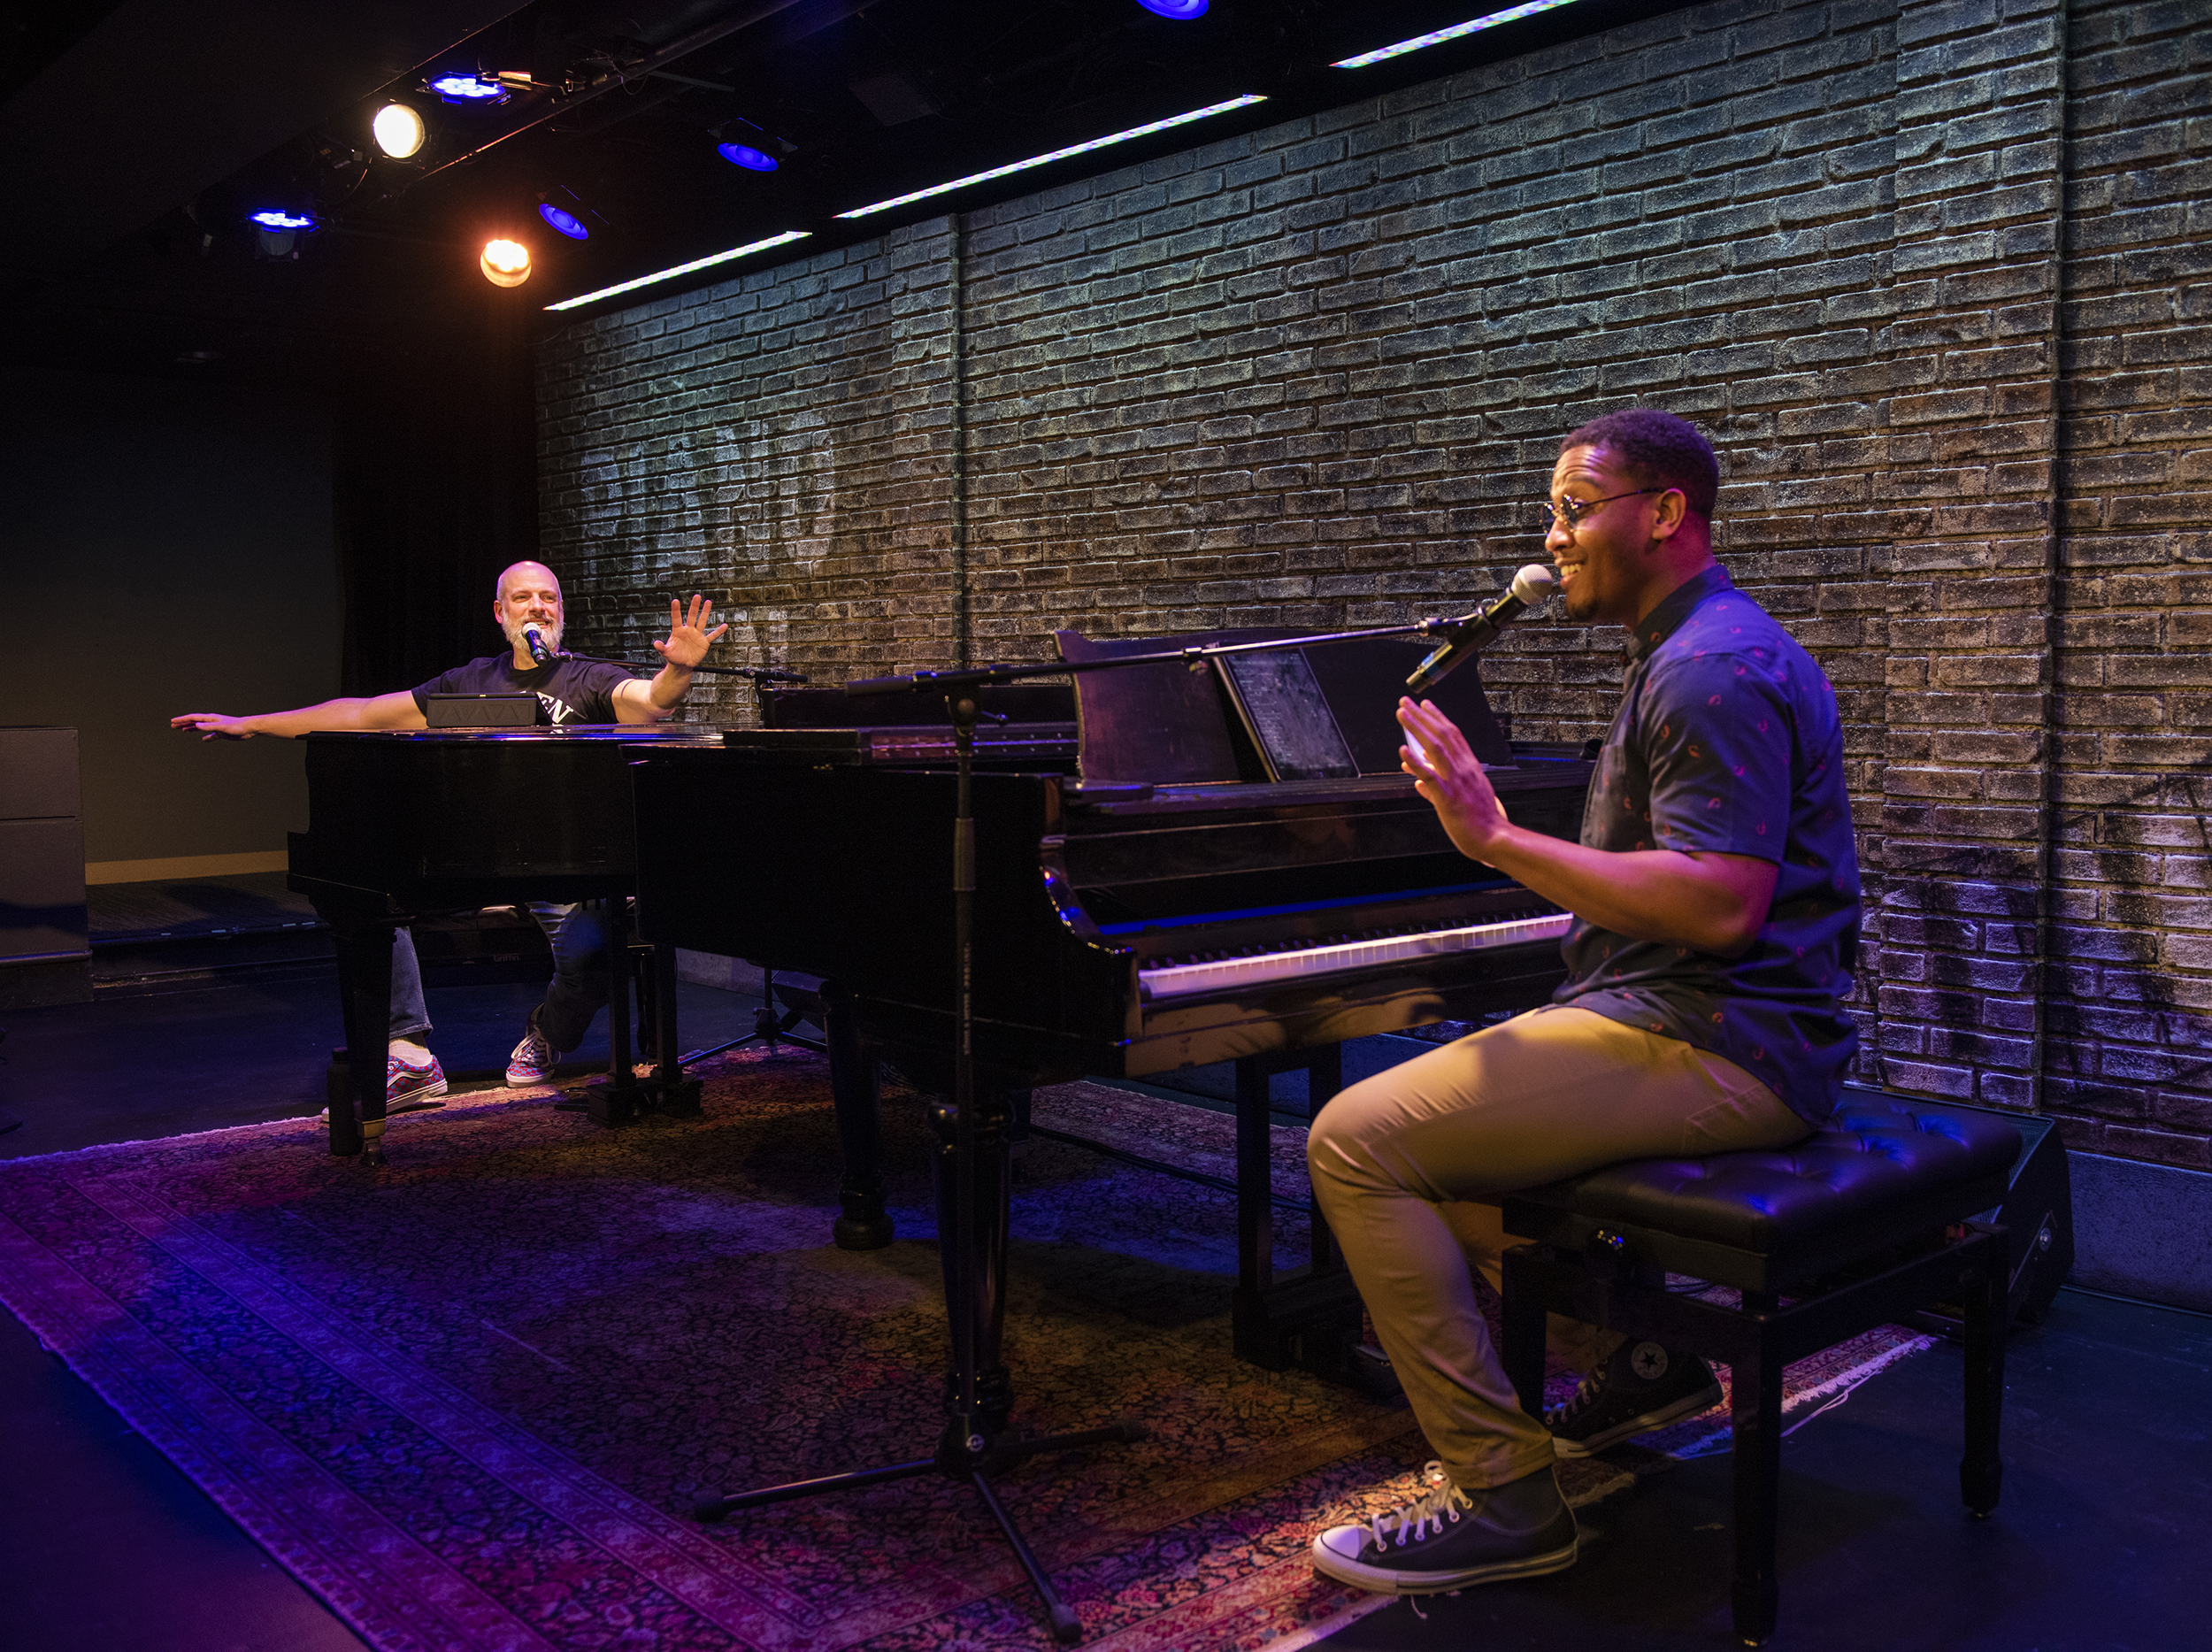 Milwaukee Repertory Theater presents Piano Men in the Stackner Cabaret January 7 – February 27, 2022. Pictured L-R: Steve Watts and Nygel D. Robinson. Photo by Michael Brosilow.